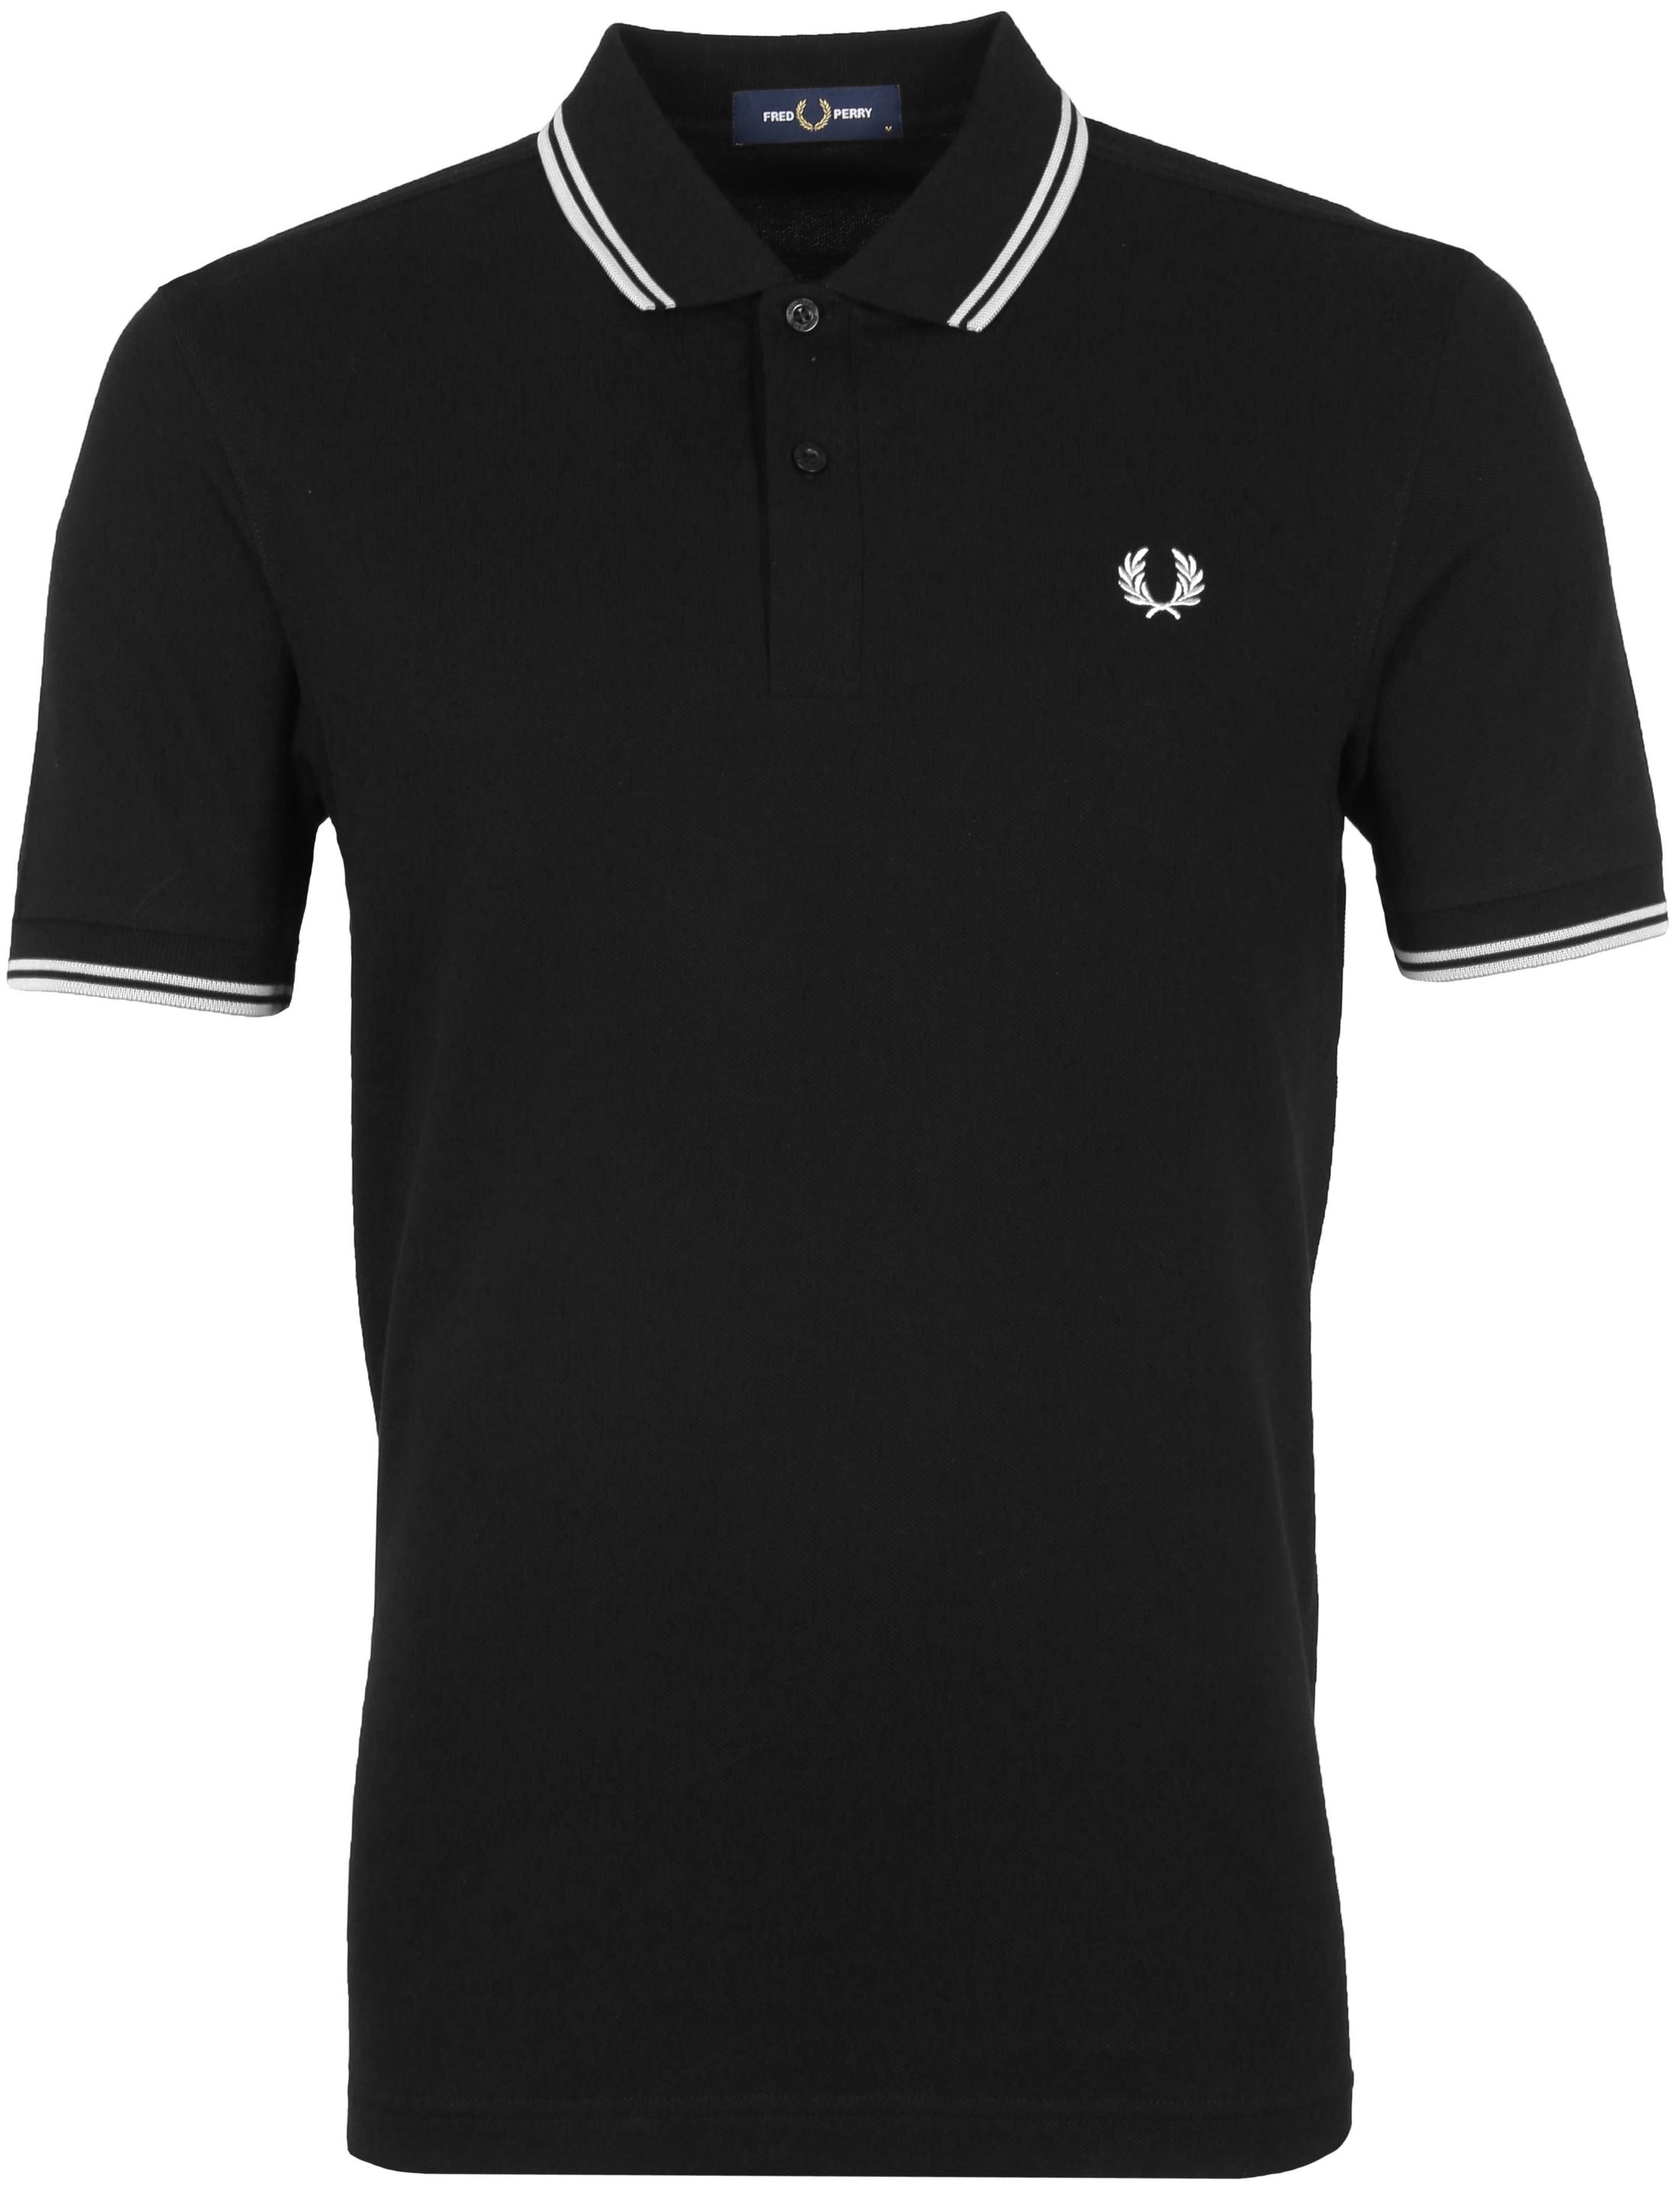 Fred Perry Polo Shirt 350 Black size L